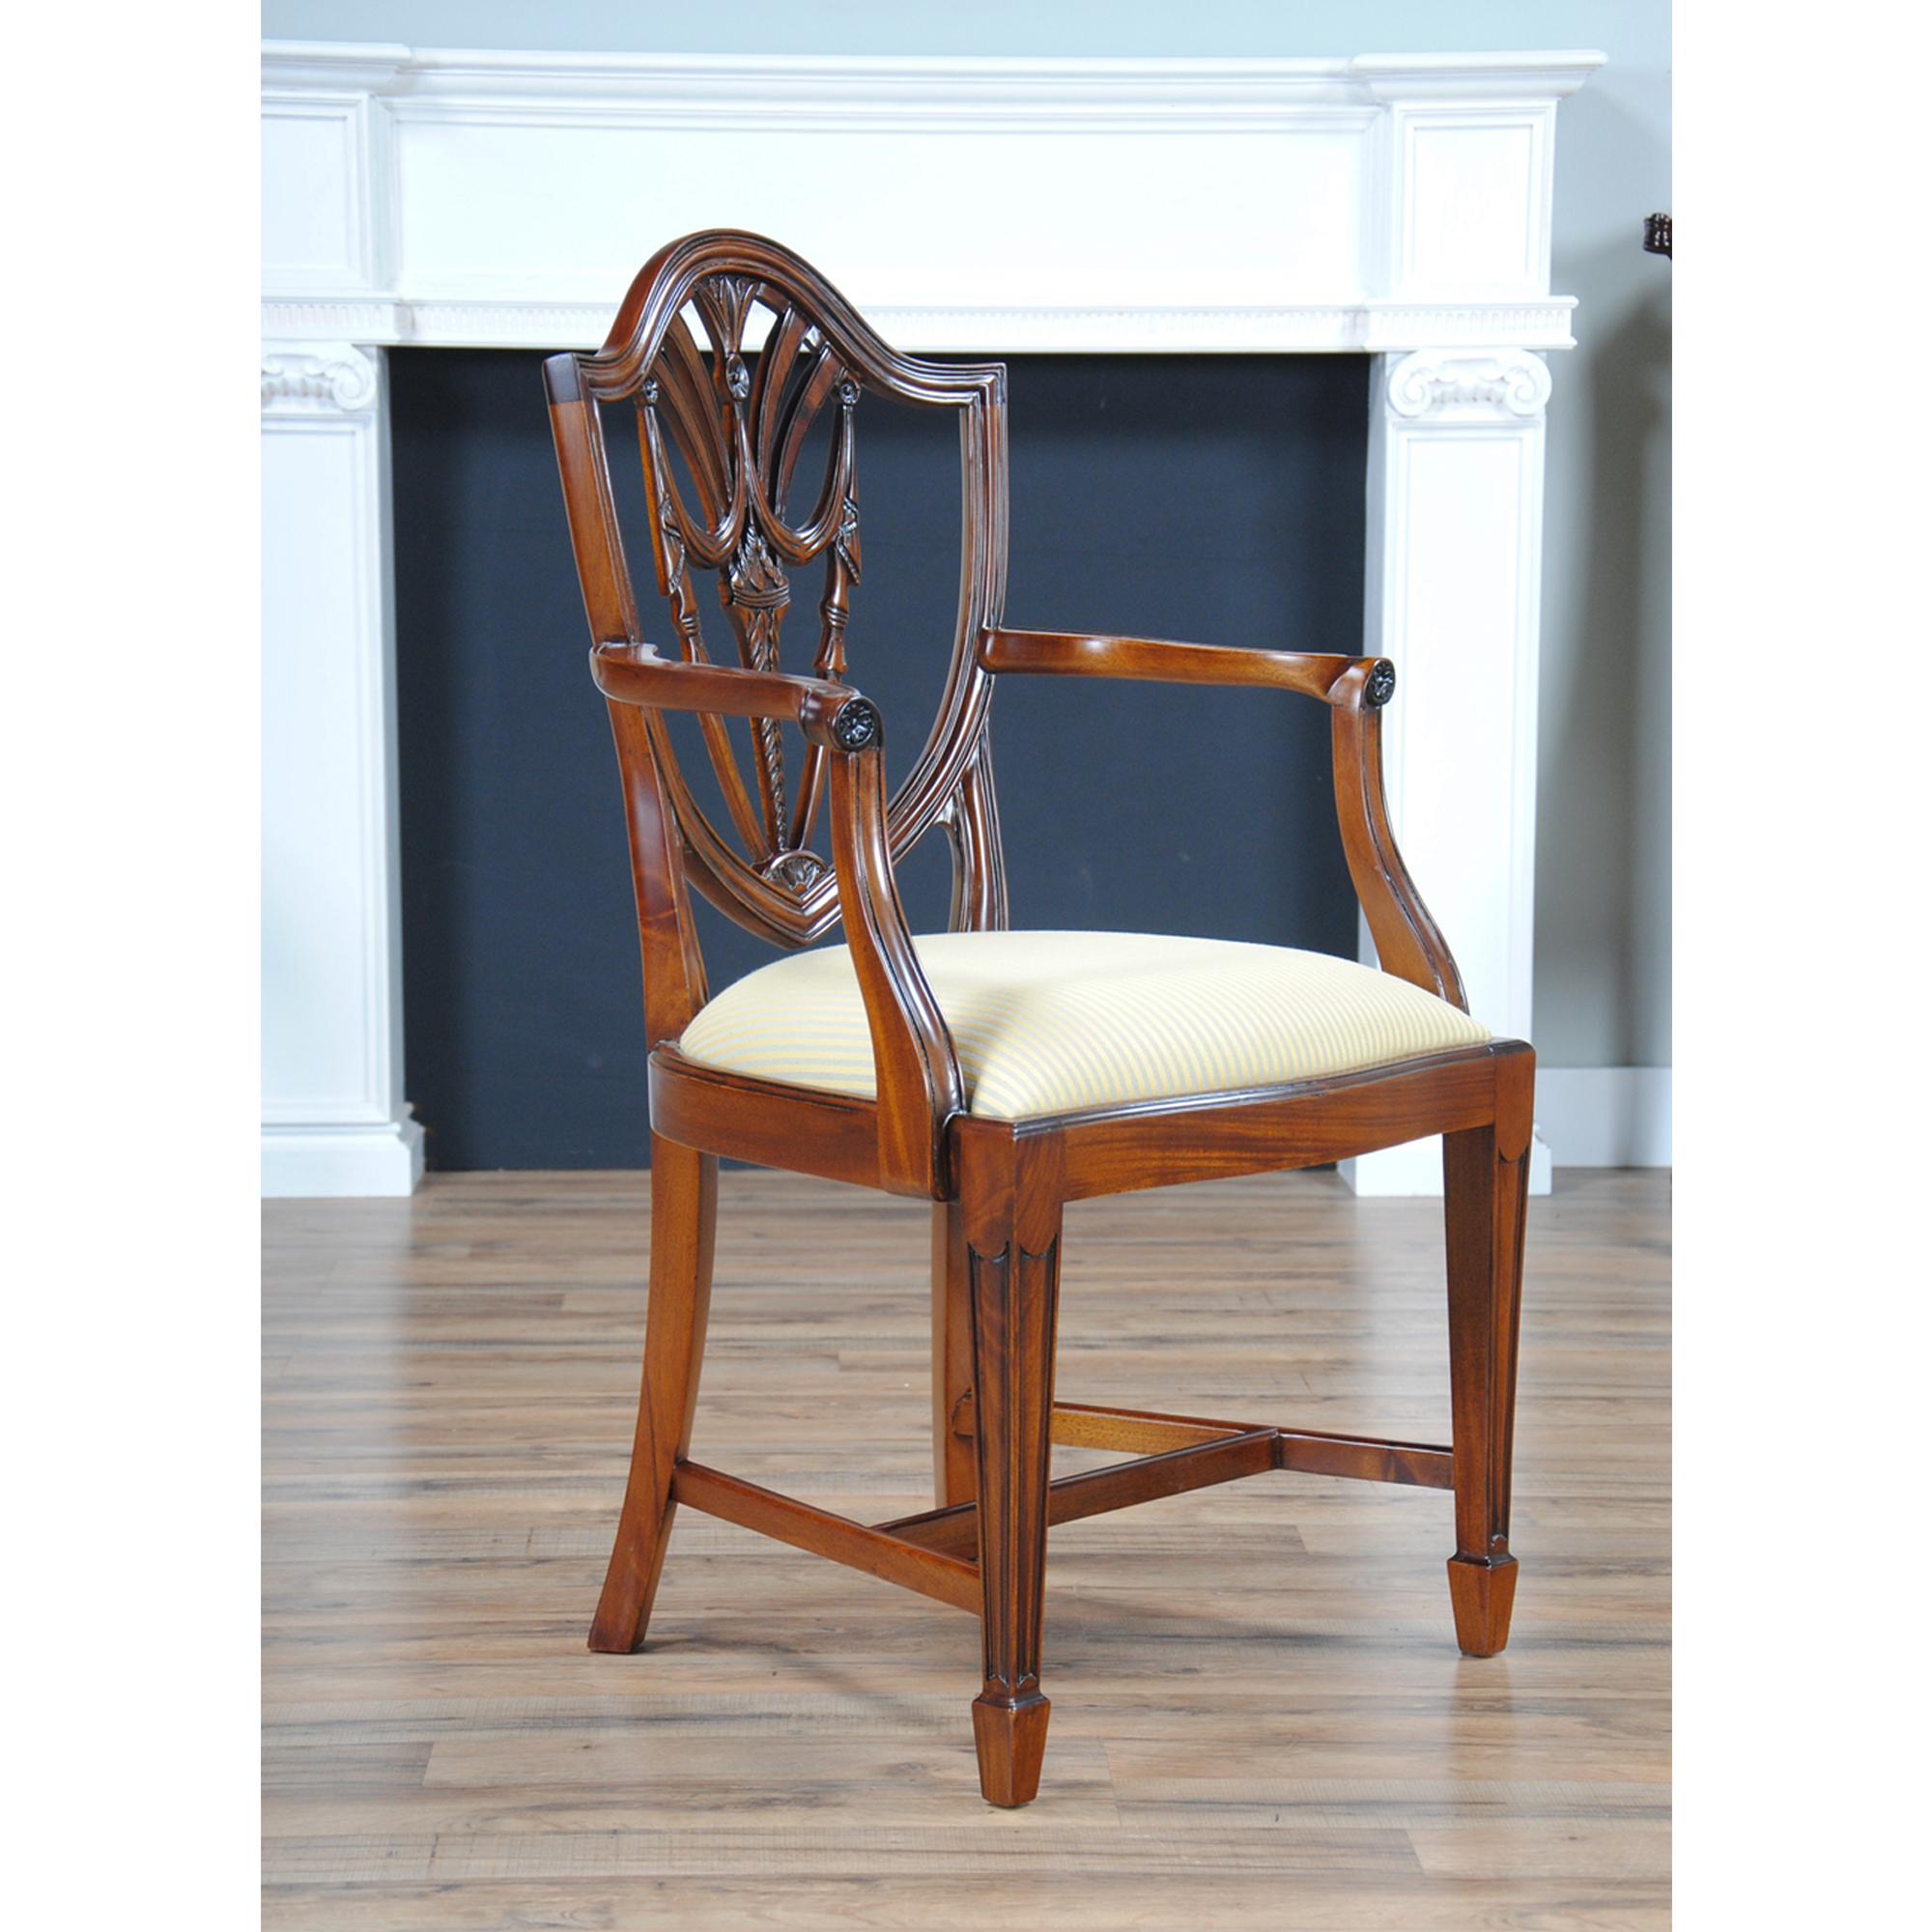 These Drape Carved Shield Back Chairs are sold as a set of 10, featuring two arm chairs and 8 side chairs. This is one of our most popular chair sets. The chairs feature an arched crest rail at the top which itself rests over top a drape carved back